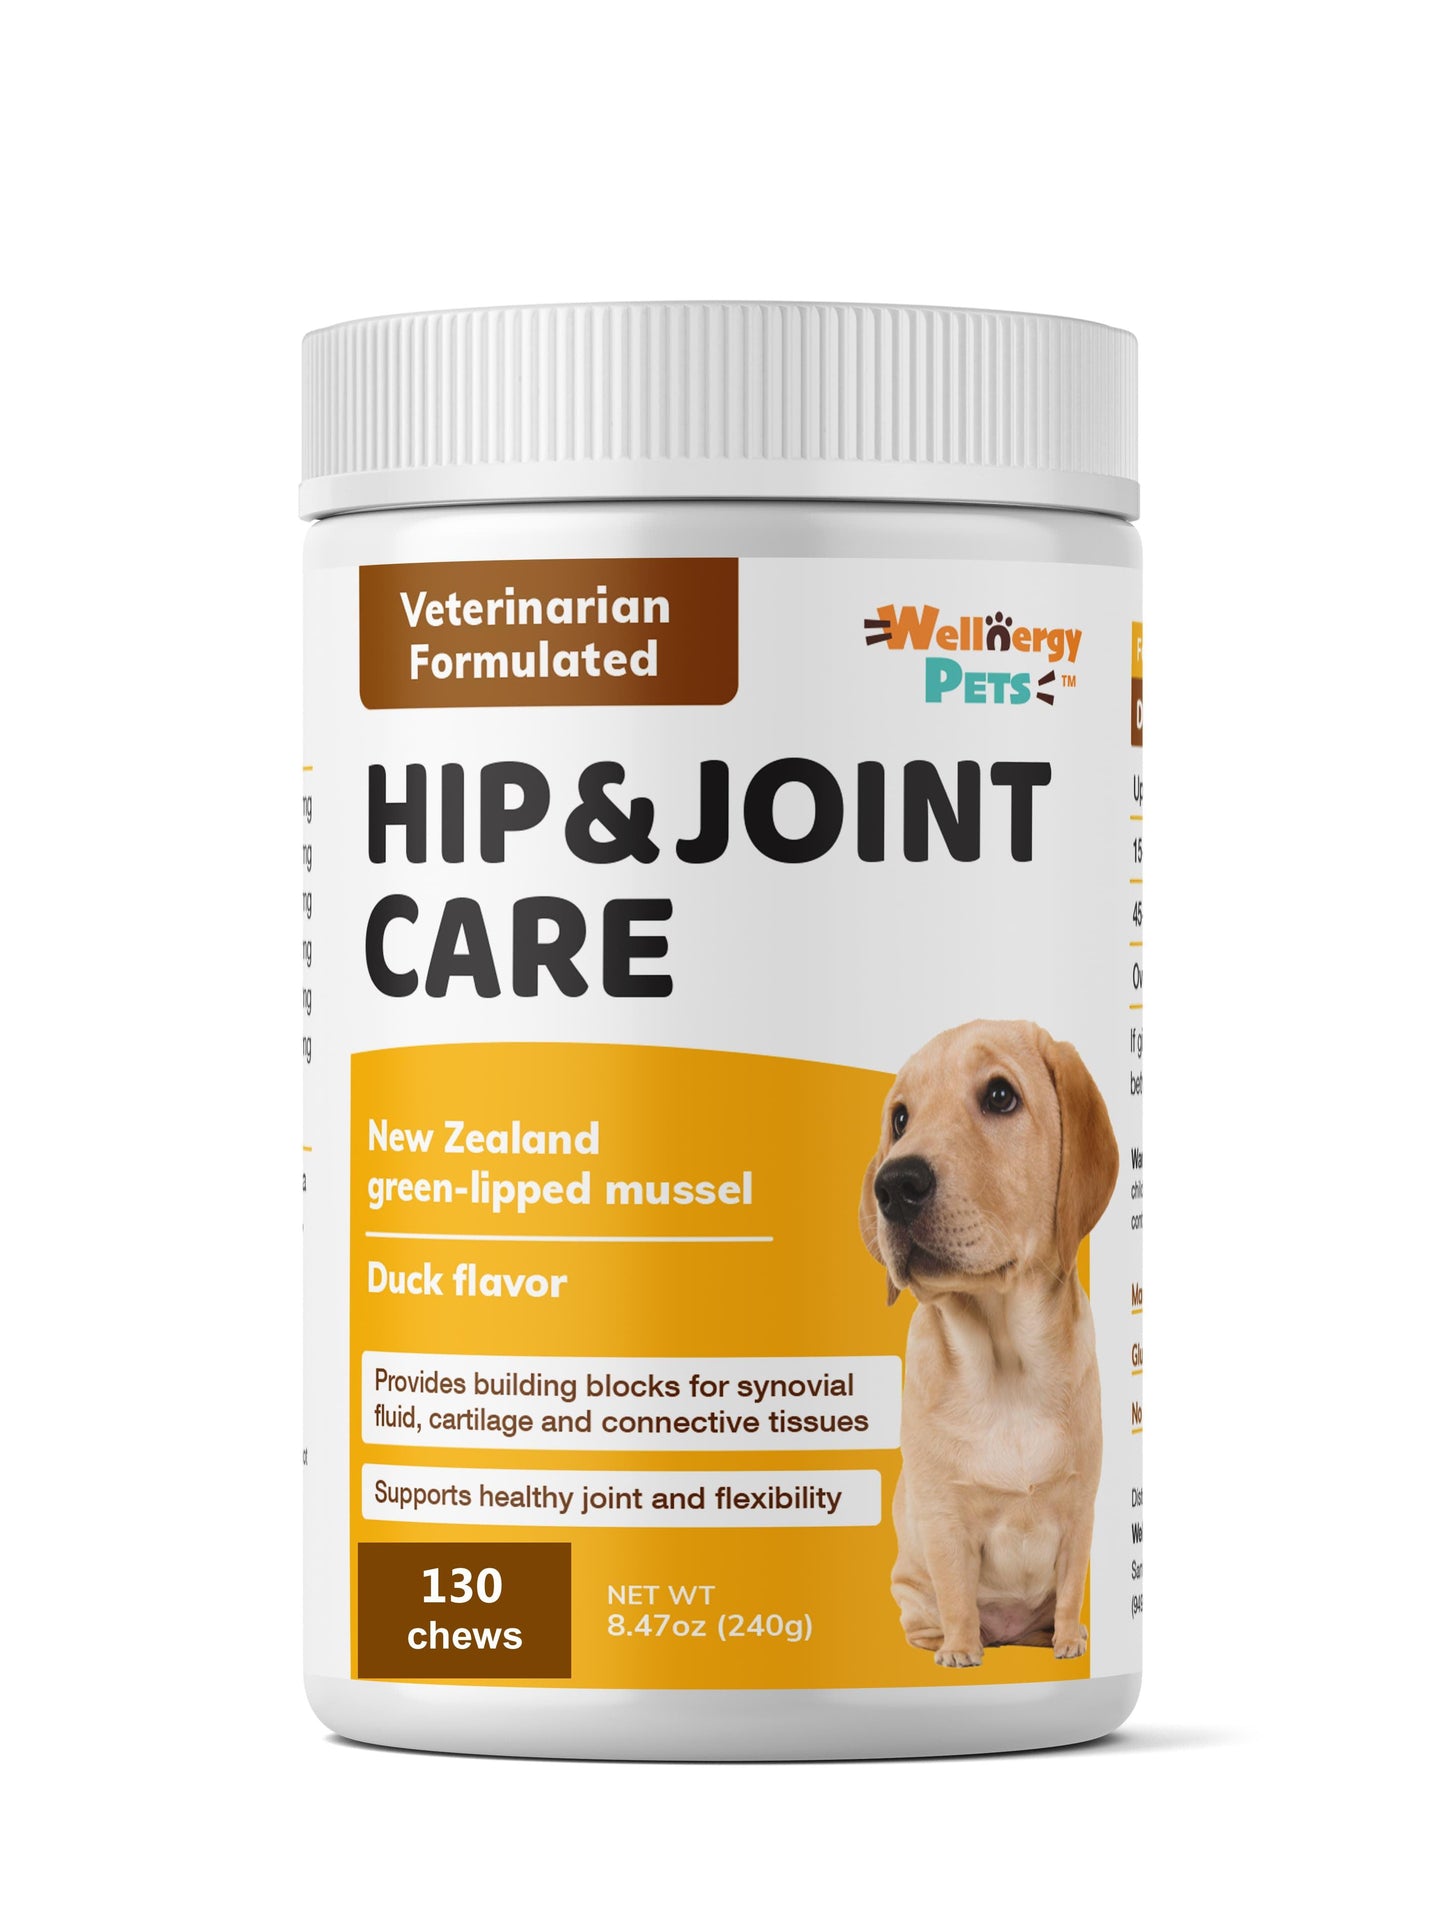 HIP & JOINT CARE - hip and joint supplement for dogs